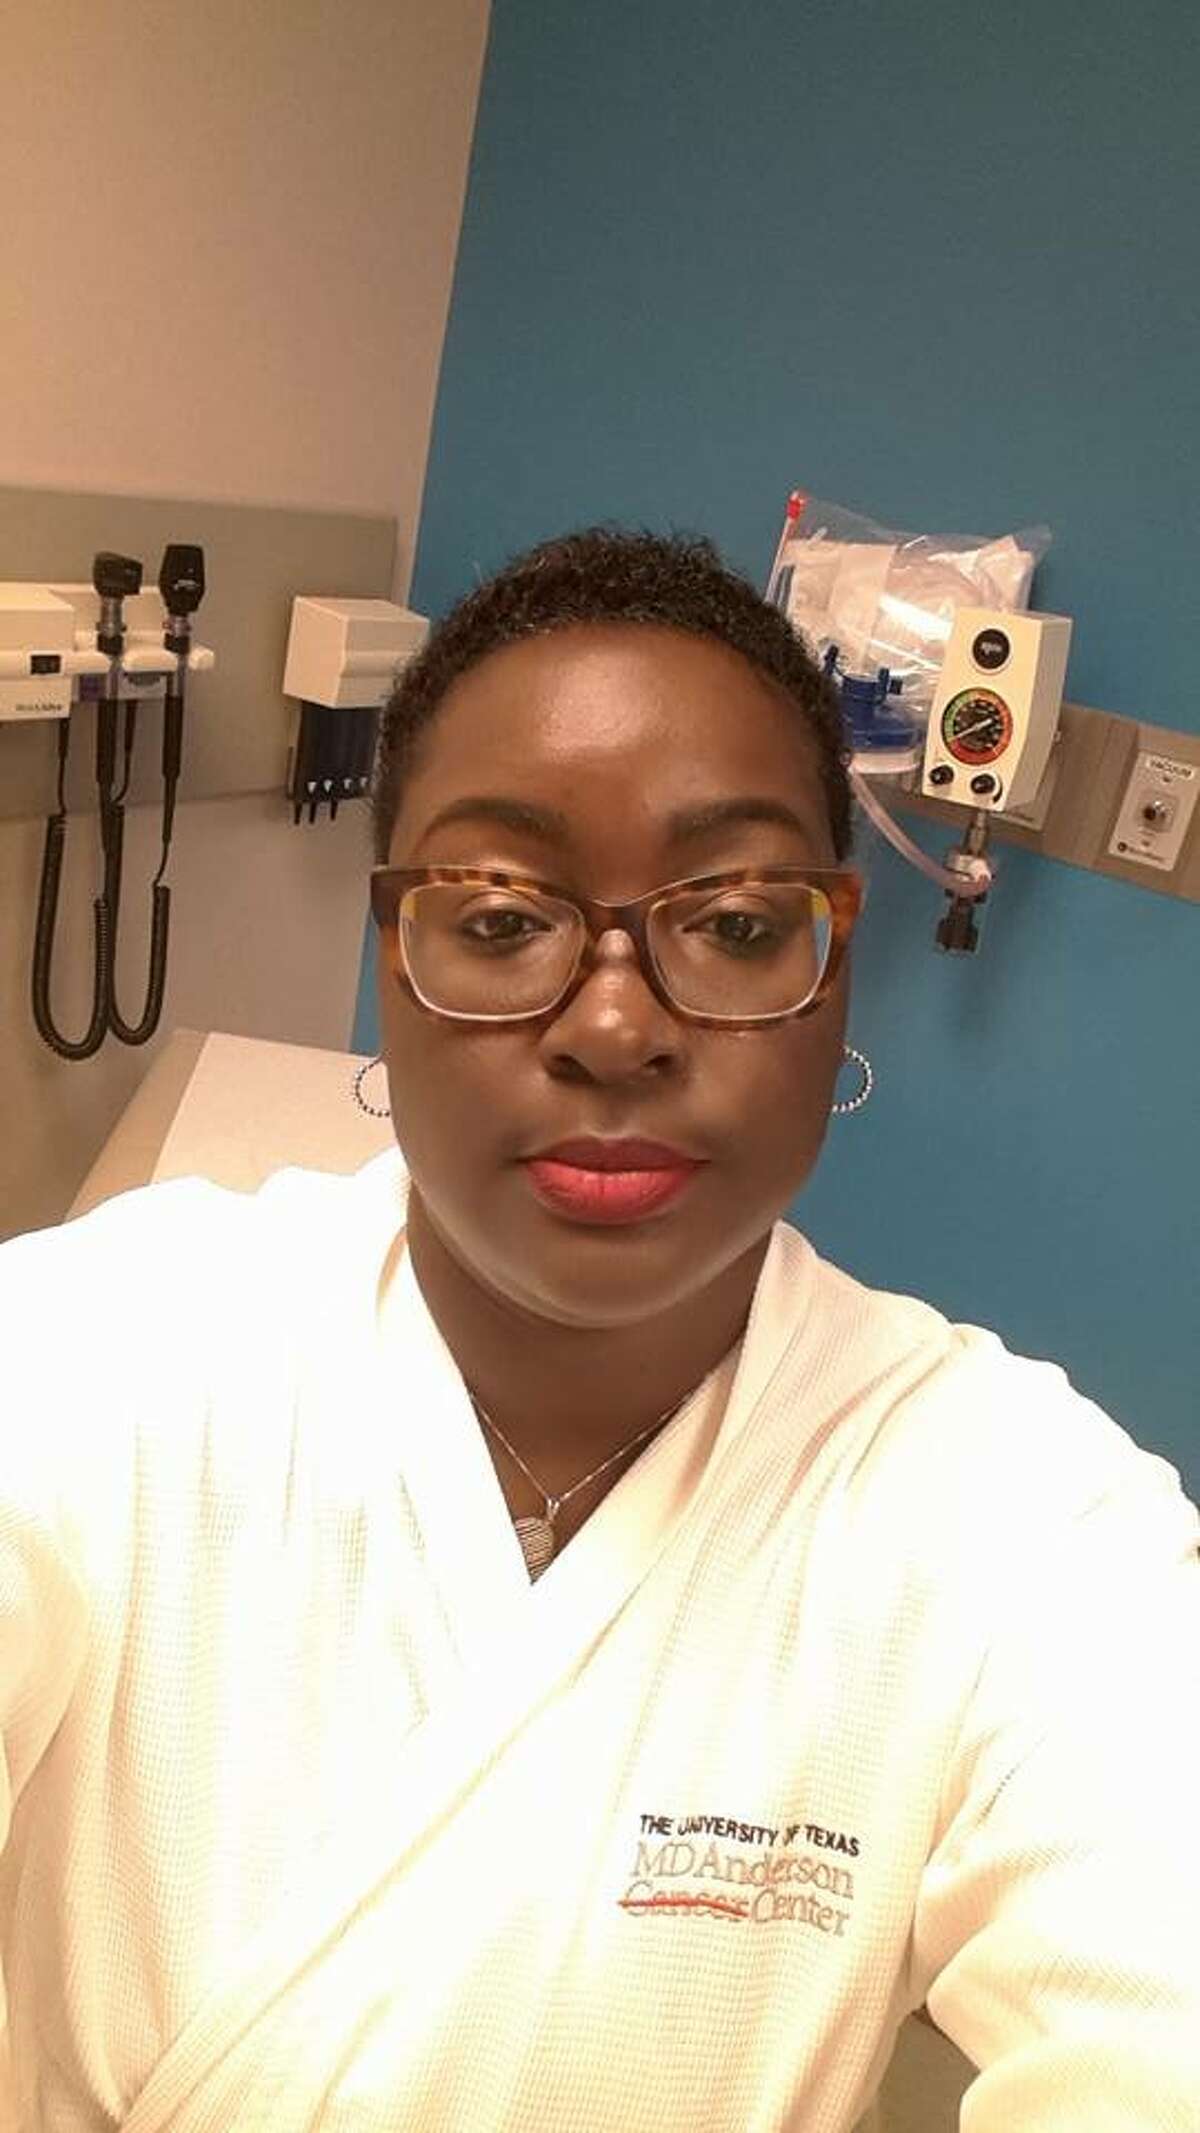 LaShonda Jackson's work as an autopsy technician took on a new meaning after a cancer diagnosis.